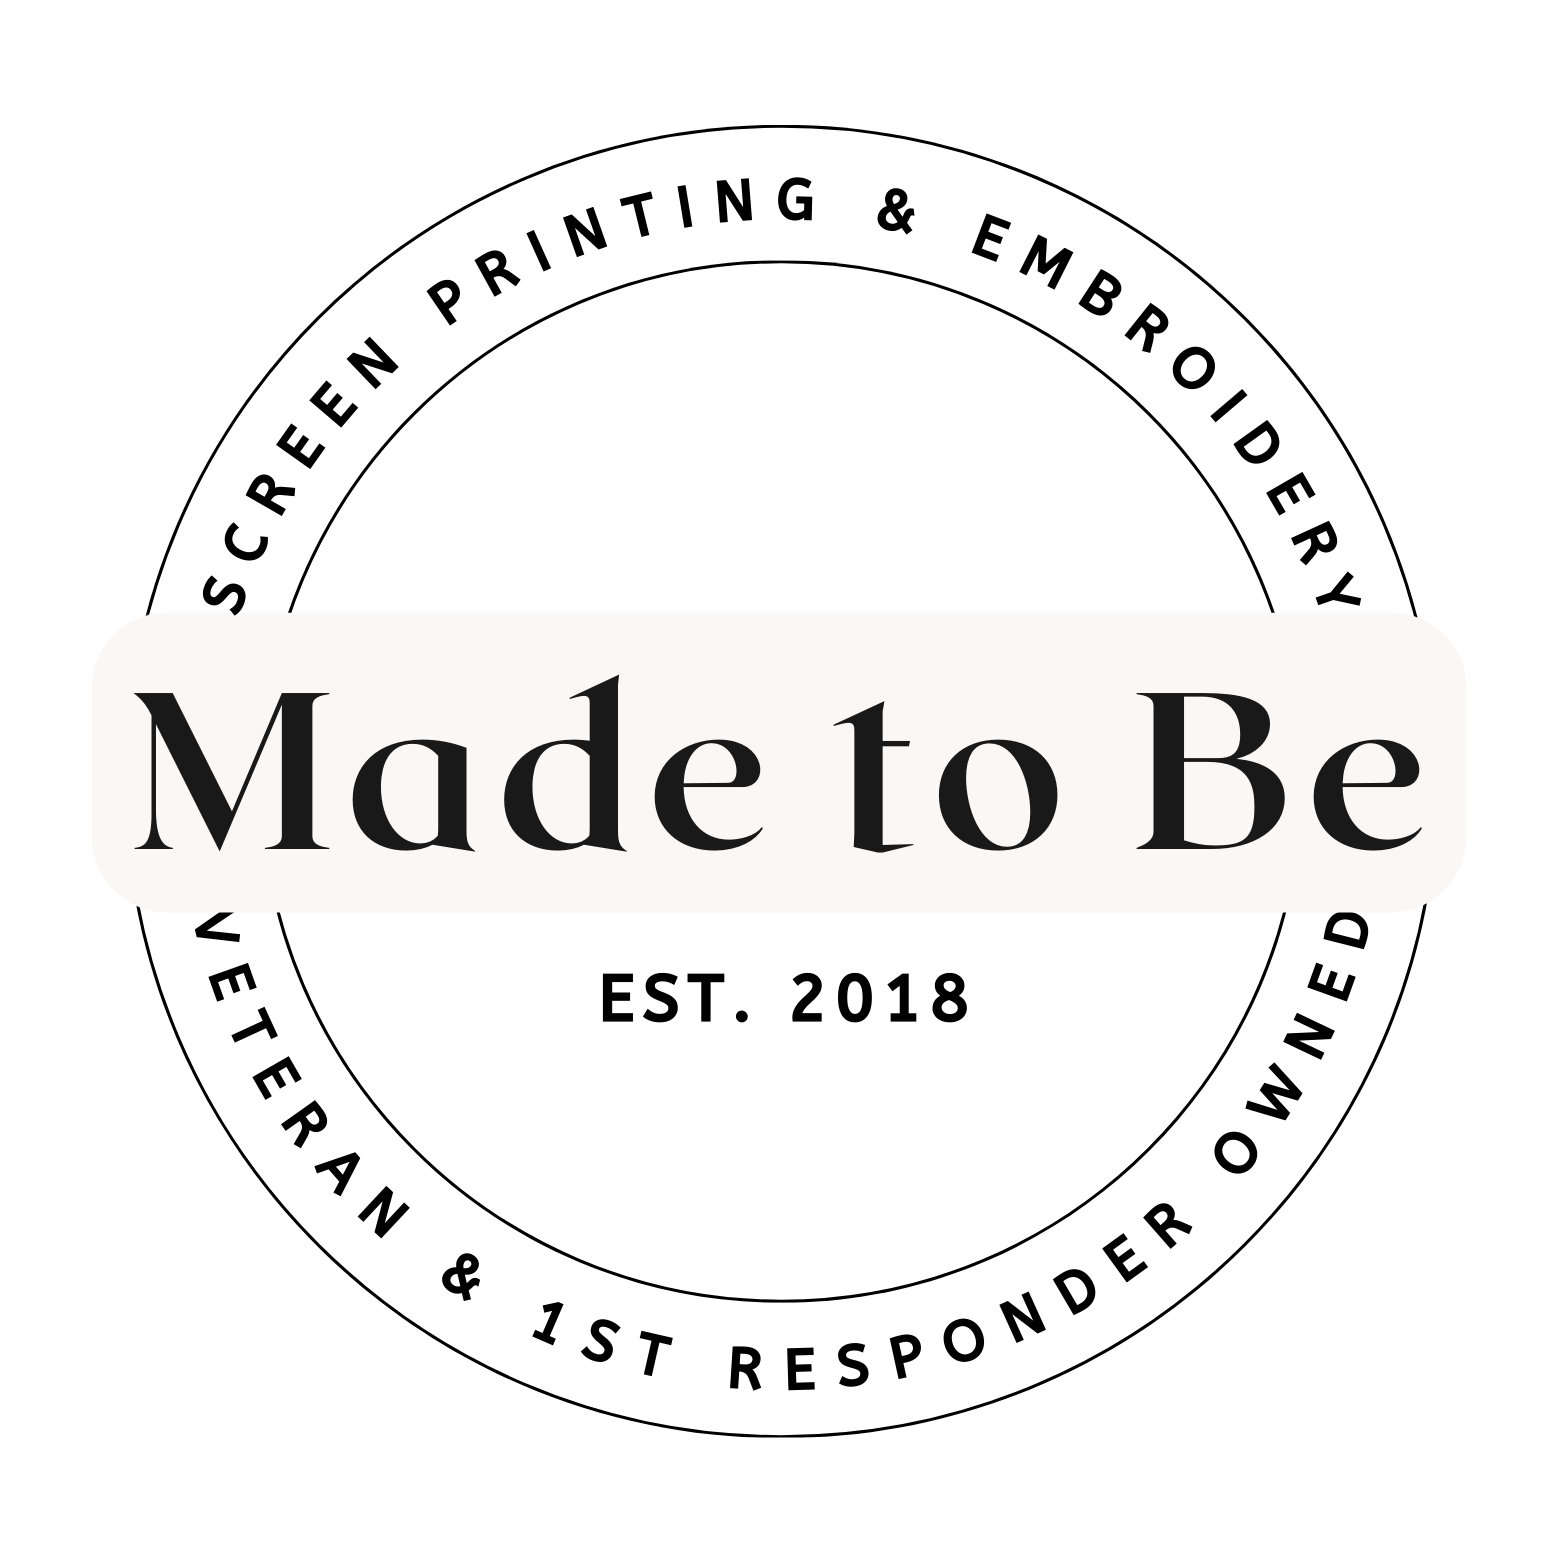 Made to Be LLC